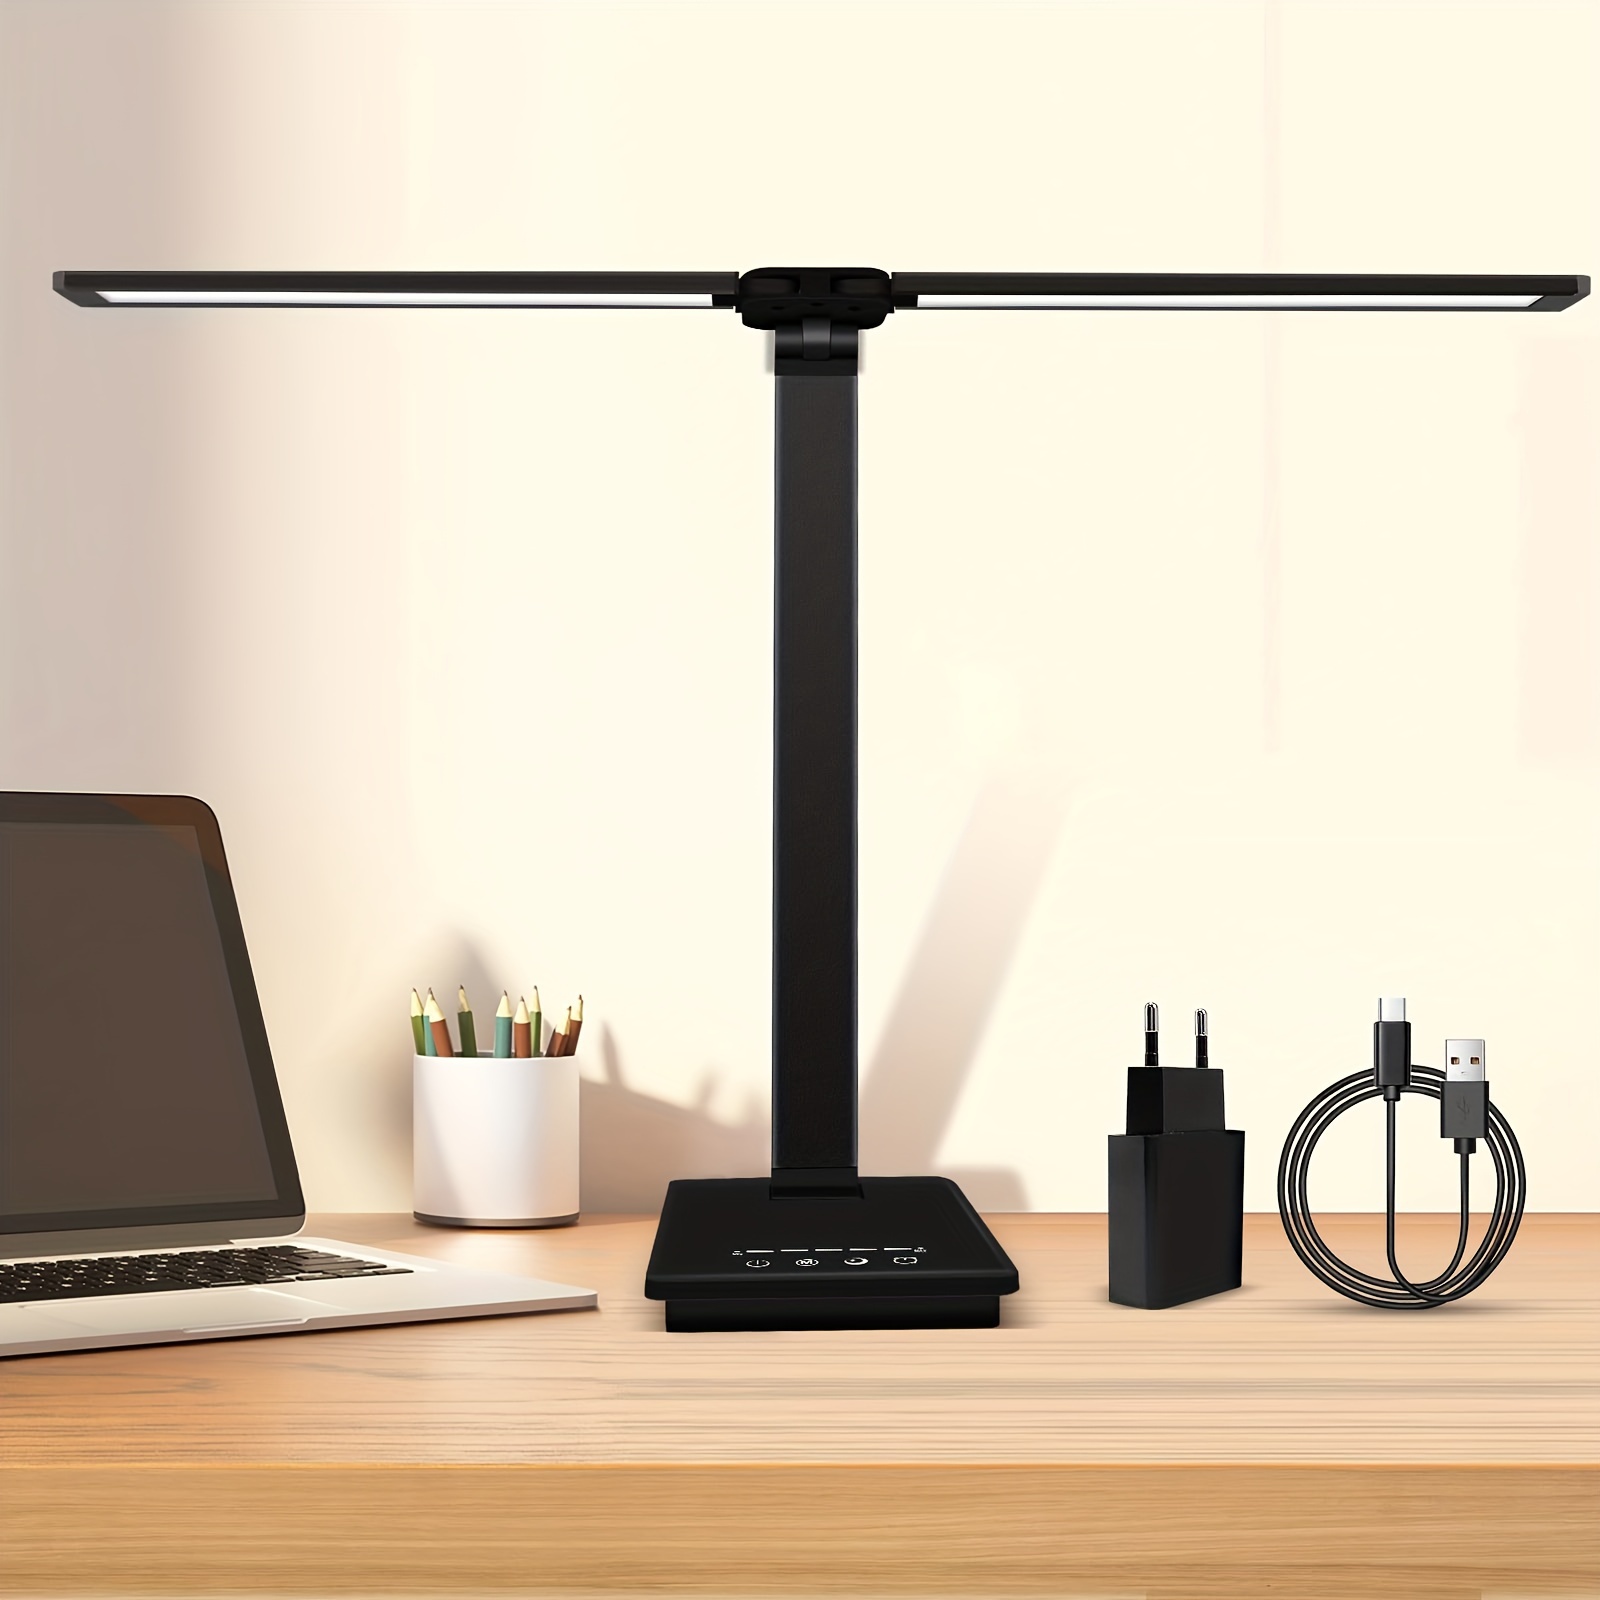 

Adjustable Foldable Desk Lamp For Home Office - Double Swing Arm Bright Led Desk Light, Eye-caring Architect Task Lamp, Touch Control Desktop Lamp Dimmable Table Desk Light For Work/study/craft